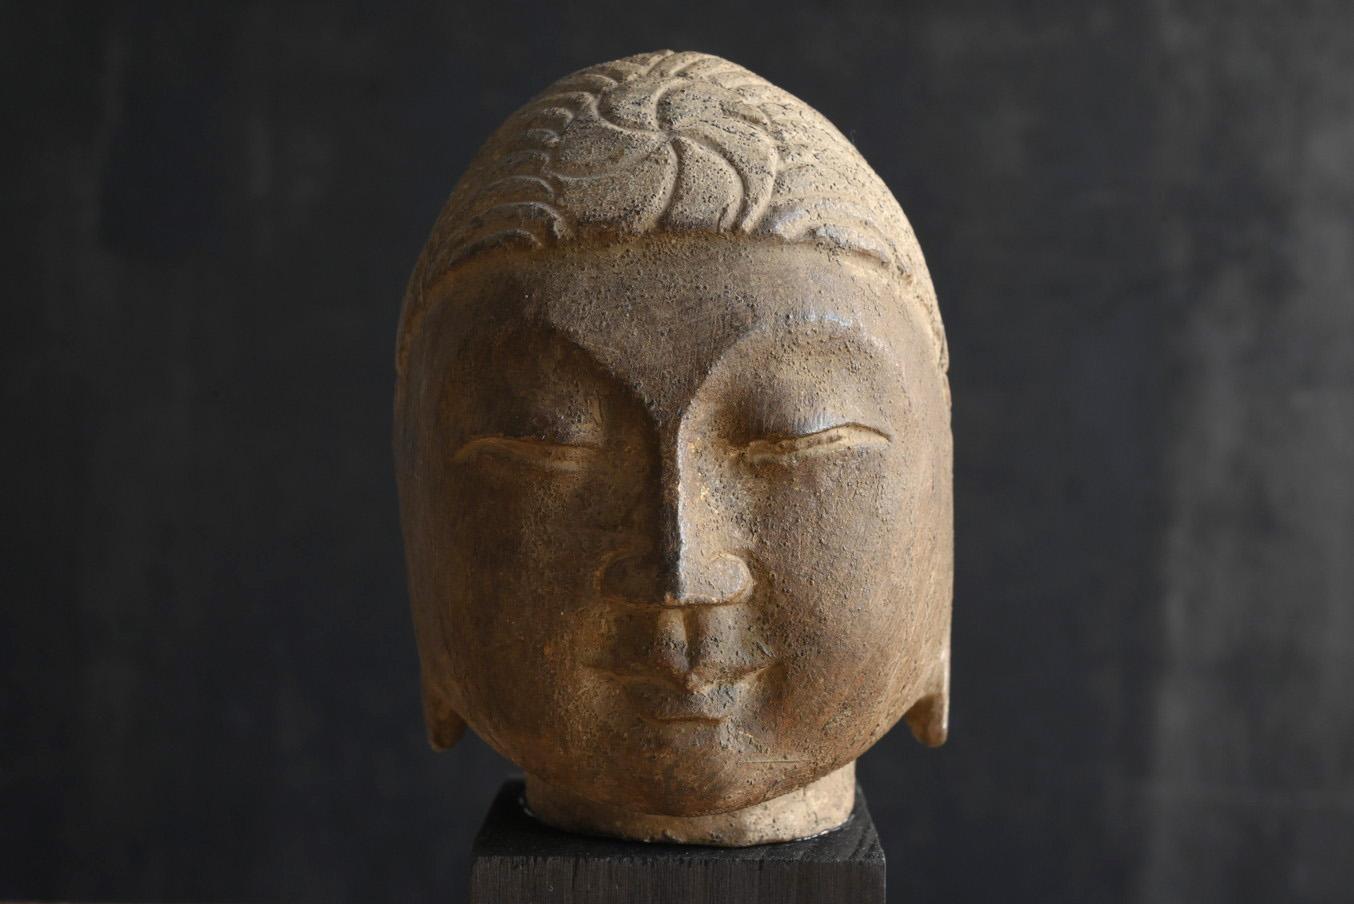 This is an old Buddha head made in China.
It dates from before the 19th century and may be even older.
The face of this Buddha's head is neat and beautifully symmetrical.The mouth is tightly pursed, the bridge of the nose is straight, and the